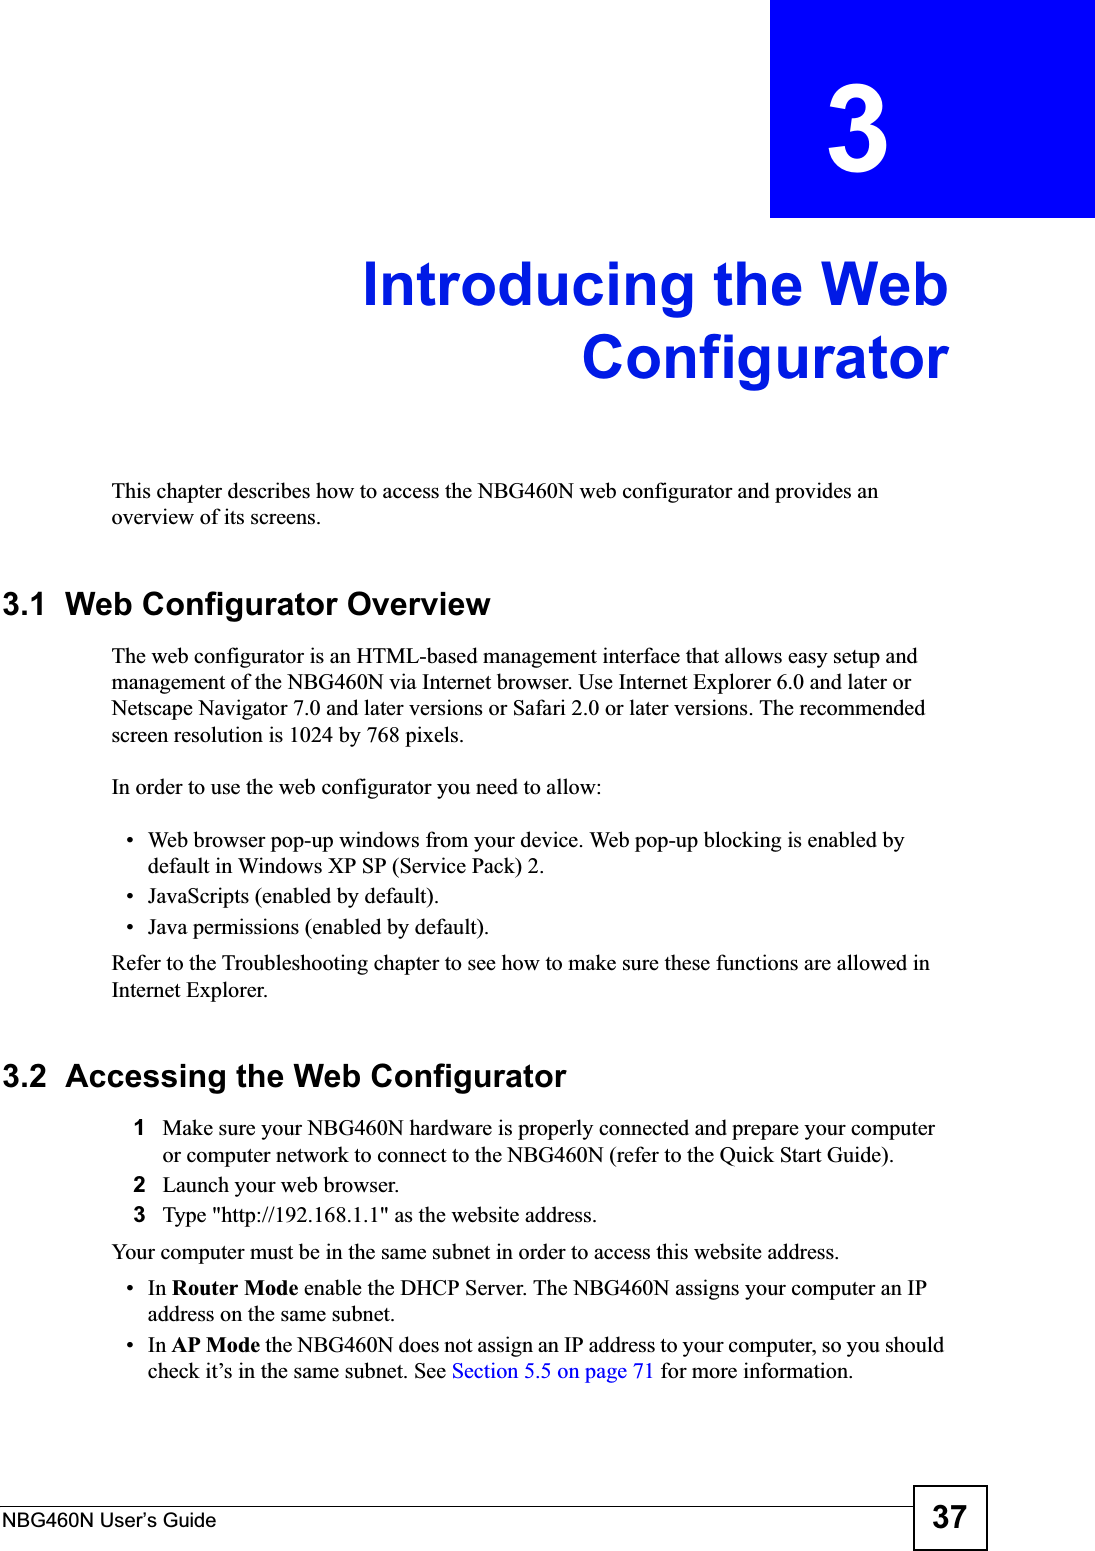 NBG460N User’s Guide 37CHAPTER  3 Introducing the WebConfiguratorThis chapter describes how to access the NBG460N web configurator and provides an overview of its screens.3.1  Web Configurator OverviewThe web configurator is an HTML-based management interface that allows easy setup and management of the NBG460N via Internet browser. Use Internet Explorer 6.0 and later or Netscape Navigator 7.0 and later versions or Safari 2.0 or later versions. The recommended screen resolution is 1024 by 768 pixels.In order to use the web configurator you need to allow:• Web browser pop-up windows from your device. Web pop-up blocking is enabled by default in Windows XP SP (Service Pack) 2.• JavaScripts (enabled by default).• Java permissions (enabled by default).Refer to the Troubleshooting chapter to see how to make sure these functions are allowed in Internet Explorer.3.2  Accessing the Web Configurator1Make sure your NBG460N hardware is properly connected and prepare your computer or computer network to connect to the NBG460N (refer to the Quick Start Guide).2Launch your web browser.3Type &quot;http://192.168.1.1&quot; as the website address. Your computer must be in the same subnet in order to access this website address.•In Router Mode enable the DHCP Server. The NBG460N assigns your computer an IP address on the same subnet. •In AP Mode the NBG460N does not assign an IP address to your computer, so you should check it’s in the same subnet. See Section 5.5 on page 71 for more information.